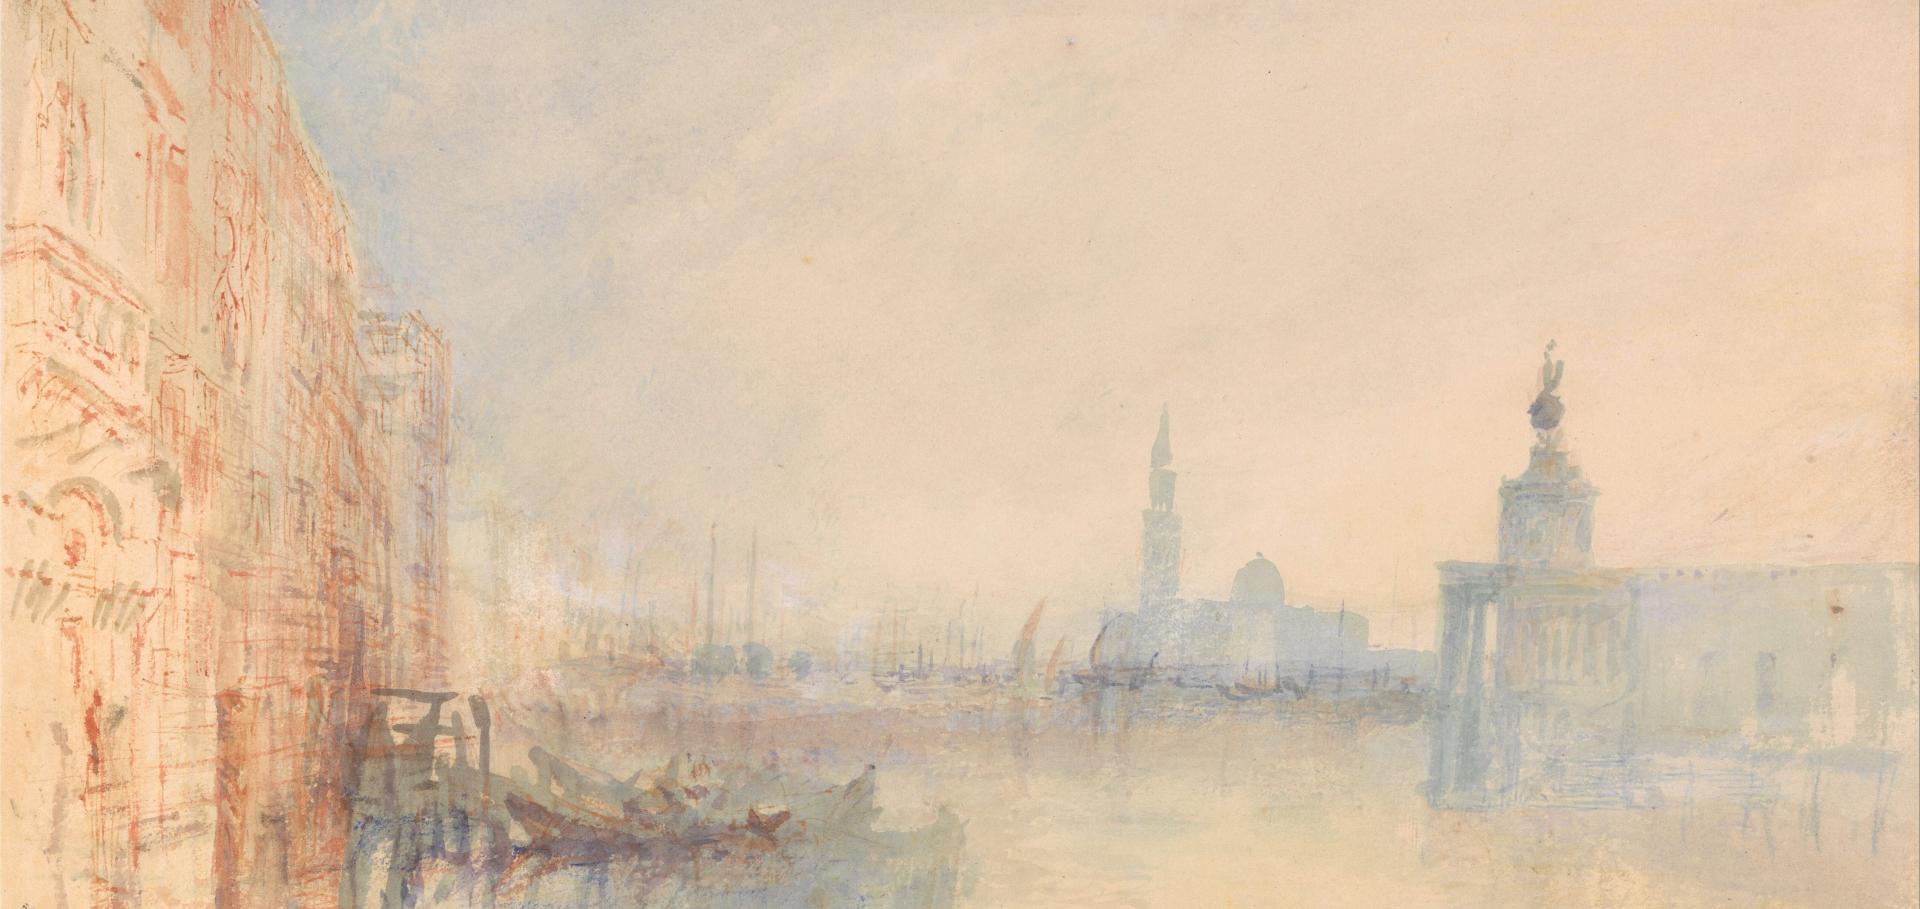 William Turner, Venice, The Mouth of the Grand Canal, watercolour (1840 ca.), Yale Center for British Art, USA